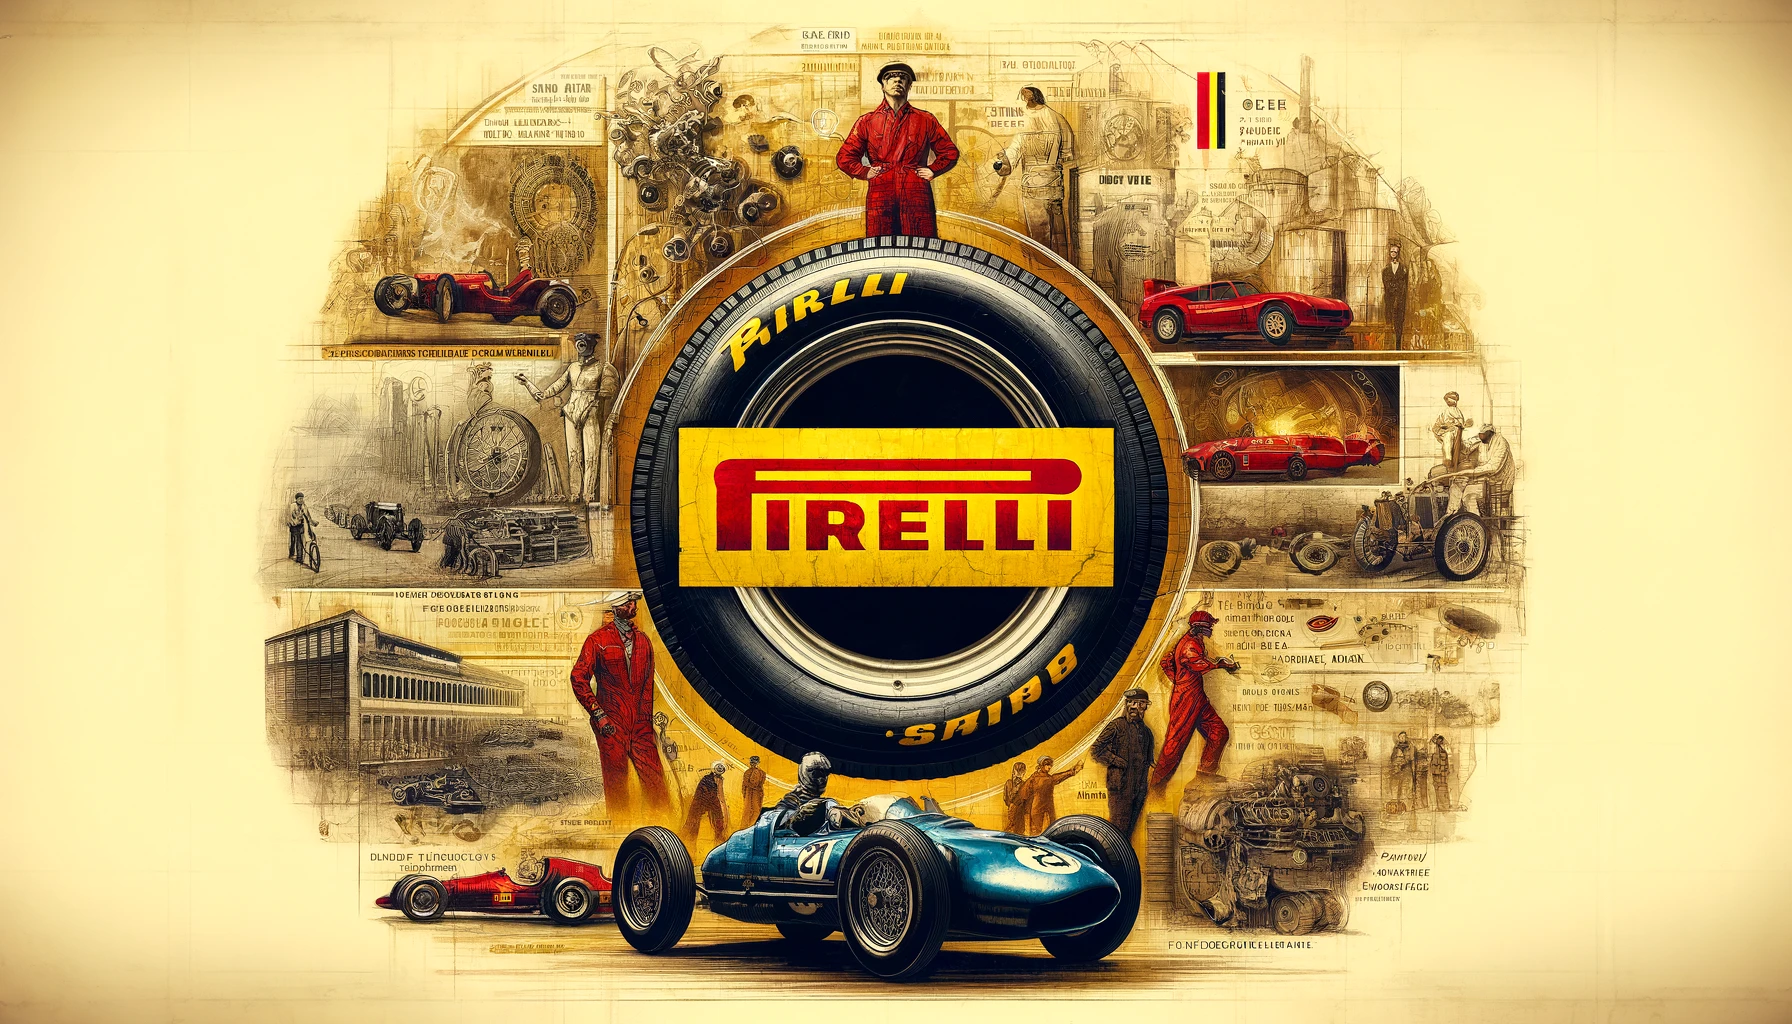 An artistic depiction of the Pirelli logo combined with visual elements illustrating the history of Pirelli. The image features the distinctive Pirelli logo at the center, surrounded by historical milestones such as vintage advertisements, classic racing cars equipped with Pirelli tires, and iconic moments in motorsport history where Pirelli tires were used. The background includes faded images of old tire manufacturing processes and key figures in the company’s development. This image celebrates the long-standing heritage and impact of Pirelli in the tire industry. The image is in a 16:9 aspect ratio.